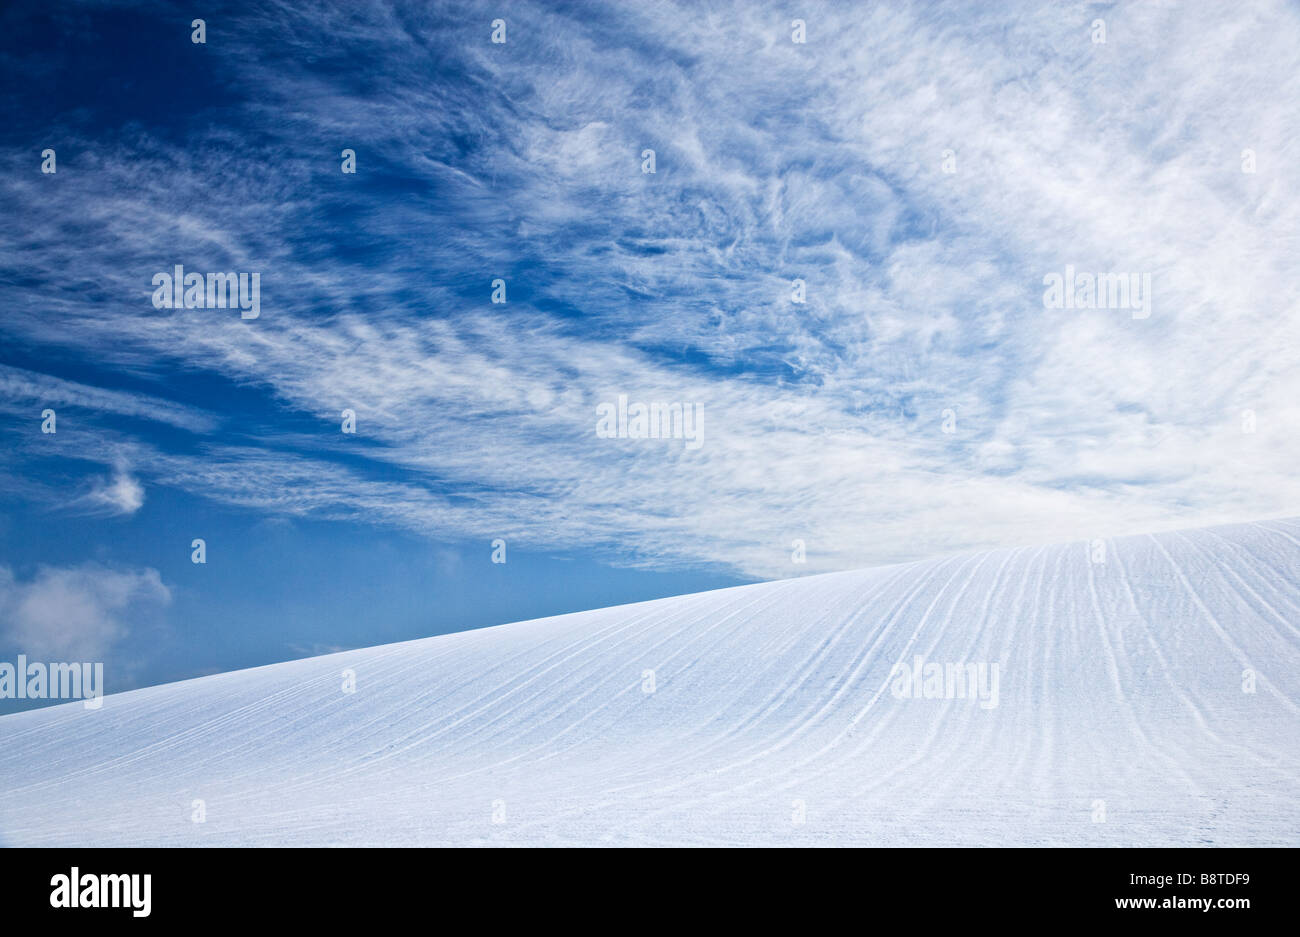 A sunny snowy winter abstract minimalist landscape view or scene on the Downs in Wiltshire England UK Stock Photo